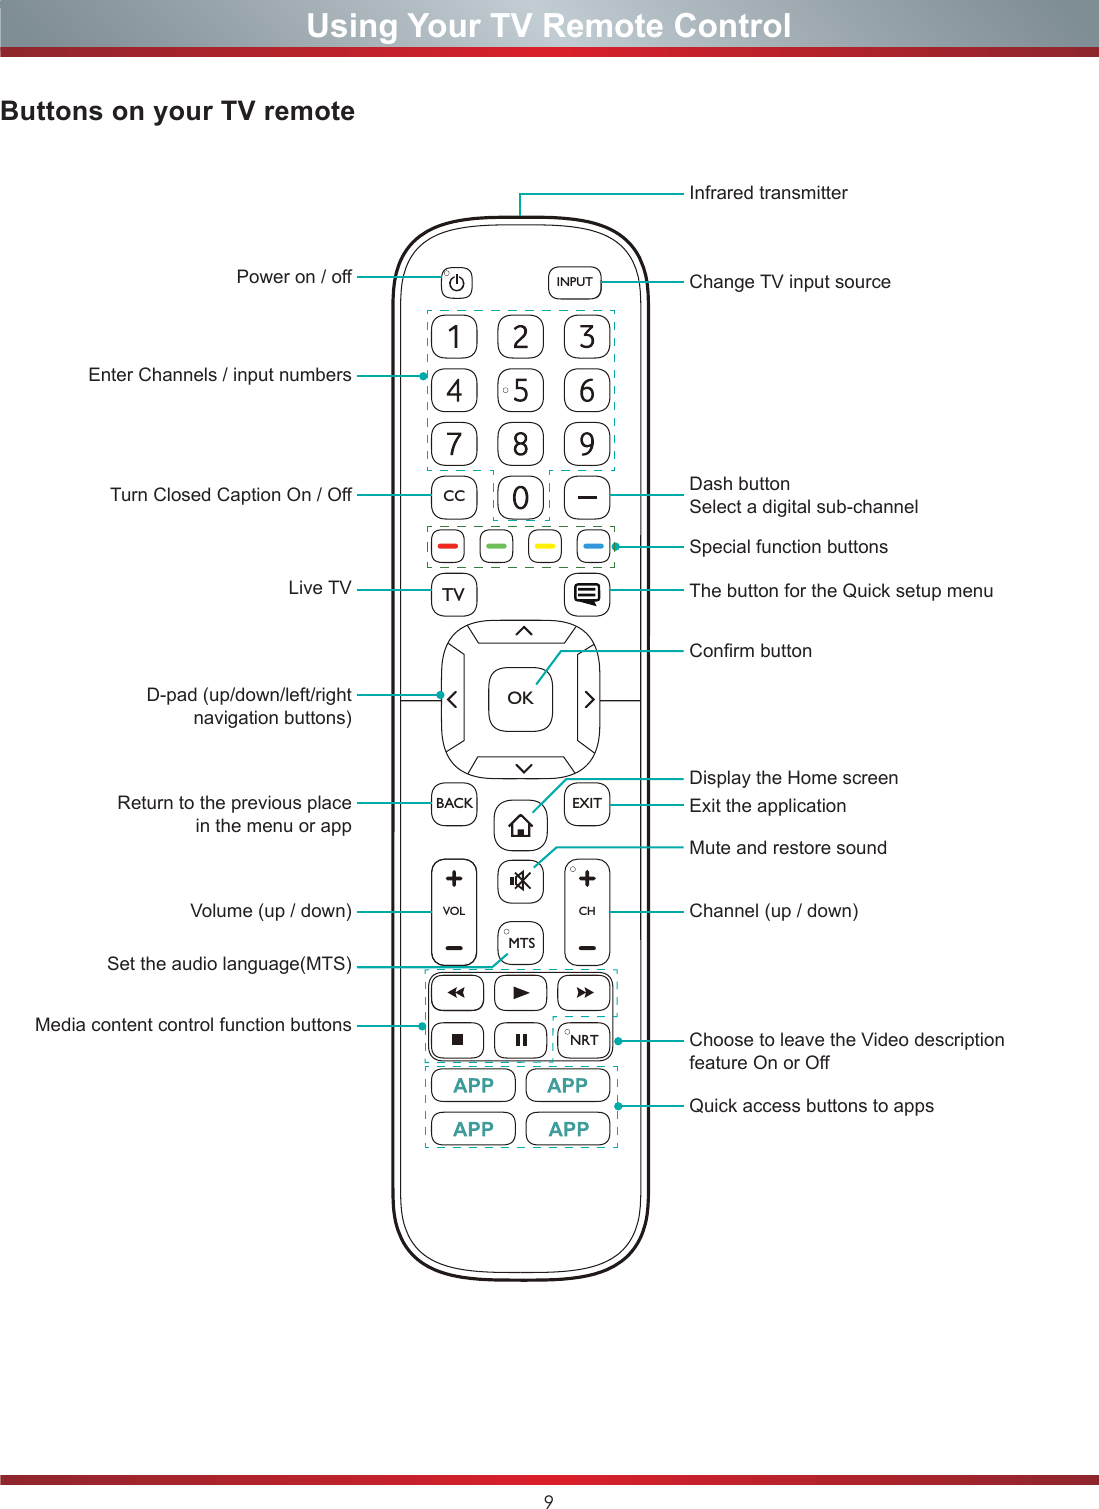 9Using Your TV Remote ControlButtons on your TV remoteVOLCHOKCCBACKTVEXITINPUTMTSNRTPower on / oEnter Channels / input numbersMedia content control function buttonsDash button Select a digital sub-channelD-pad (up/down/left/right navigation buttons)Volume (up / down)Set the audio language(MTS)Choose to leave the Video description feature On or OLive TVReturn to the previous place in the menu or appMute and restore soundInfrared transmitterChange TV input sourceChannel (up / down)Exit the applicationTurn Closed Caption On / OSpecial function buttonsThe button for the Quick setup menuDisplay the Home screenConrm buttonQuick access buttons to apps